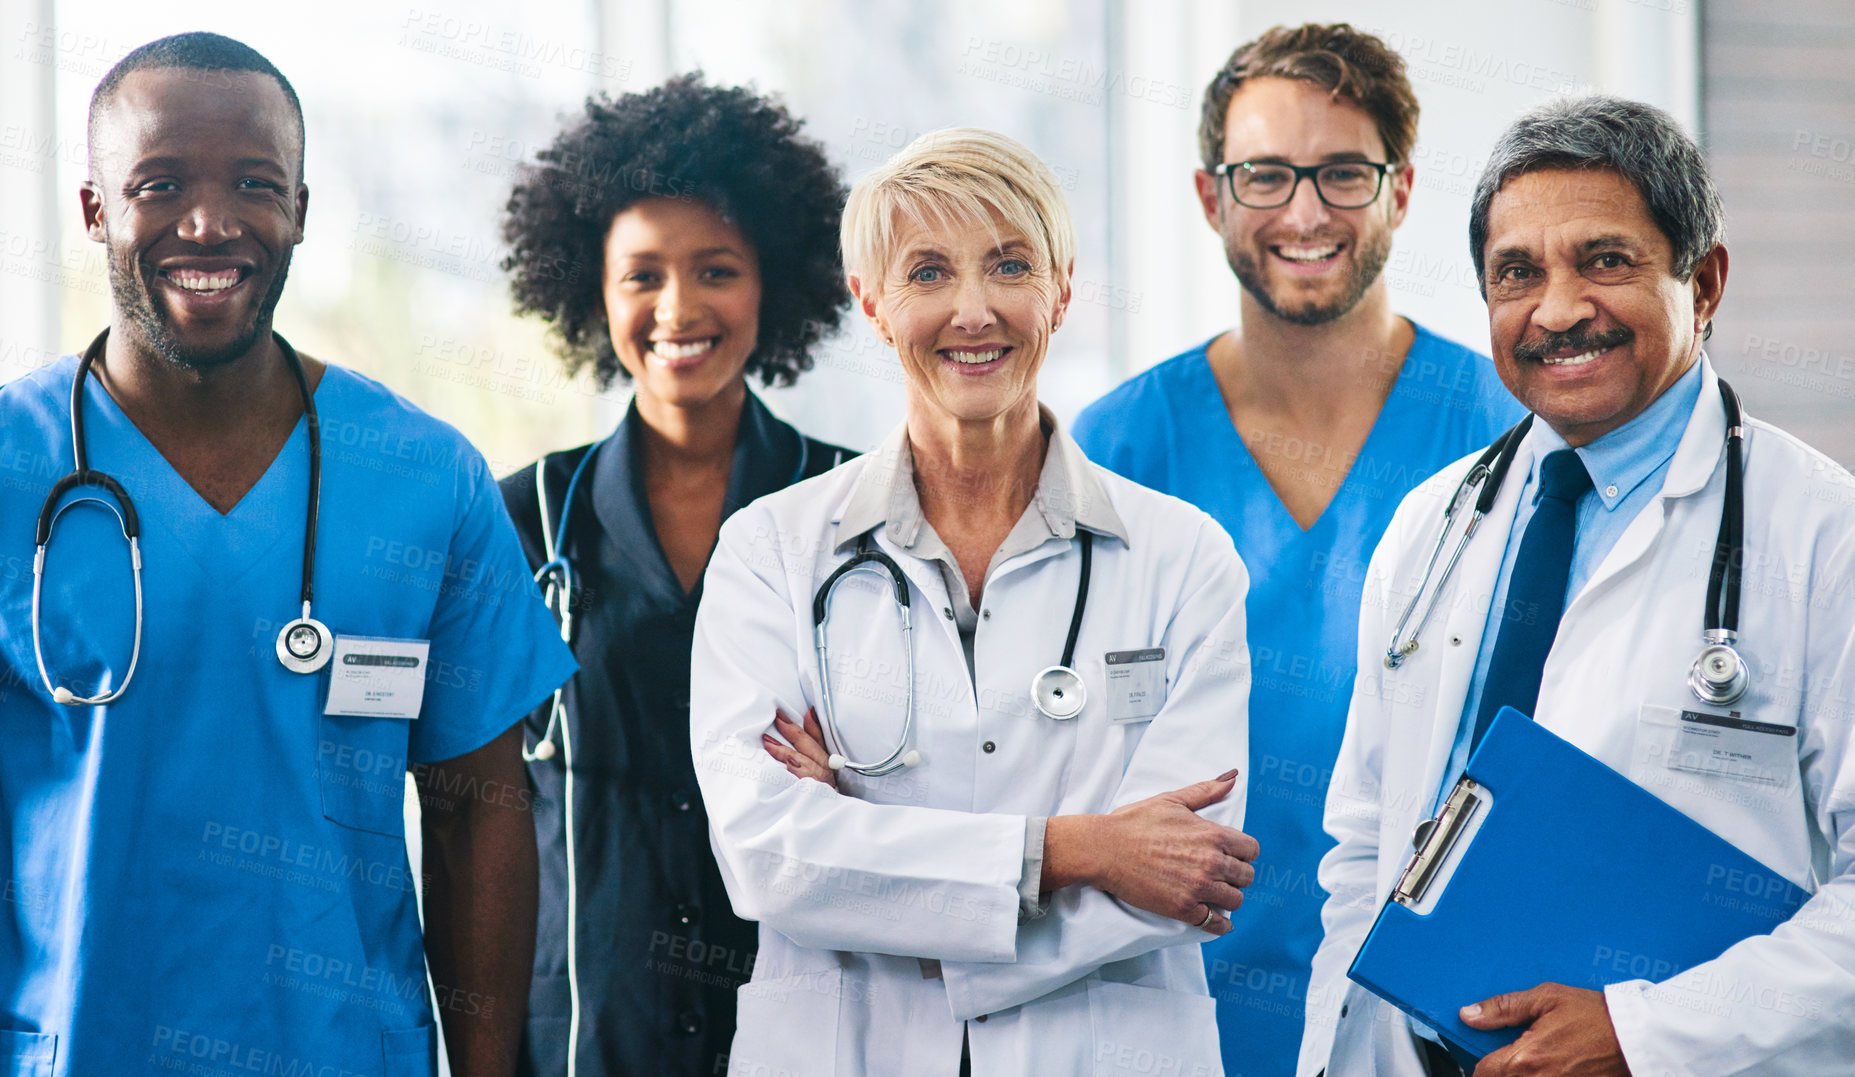 Buy stock photo Team or group of a doctor, nurse and medical professional colleagues or coworkers standing in a hospital together. Portrait of diverse healthcare workers looking confident and happy about medicine